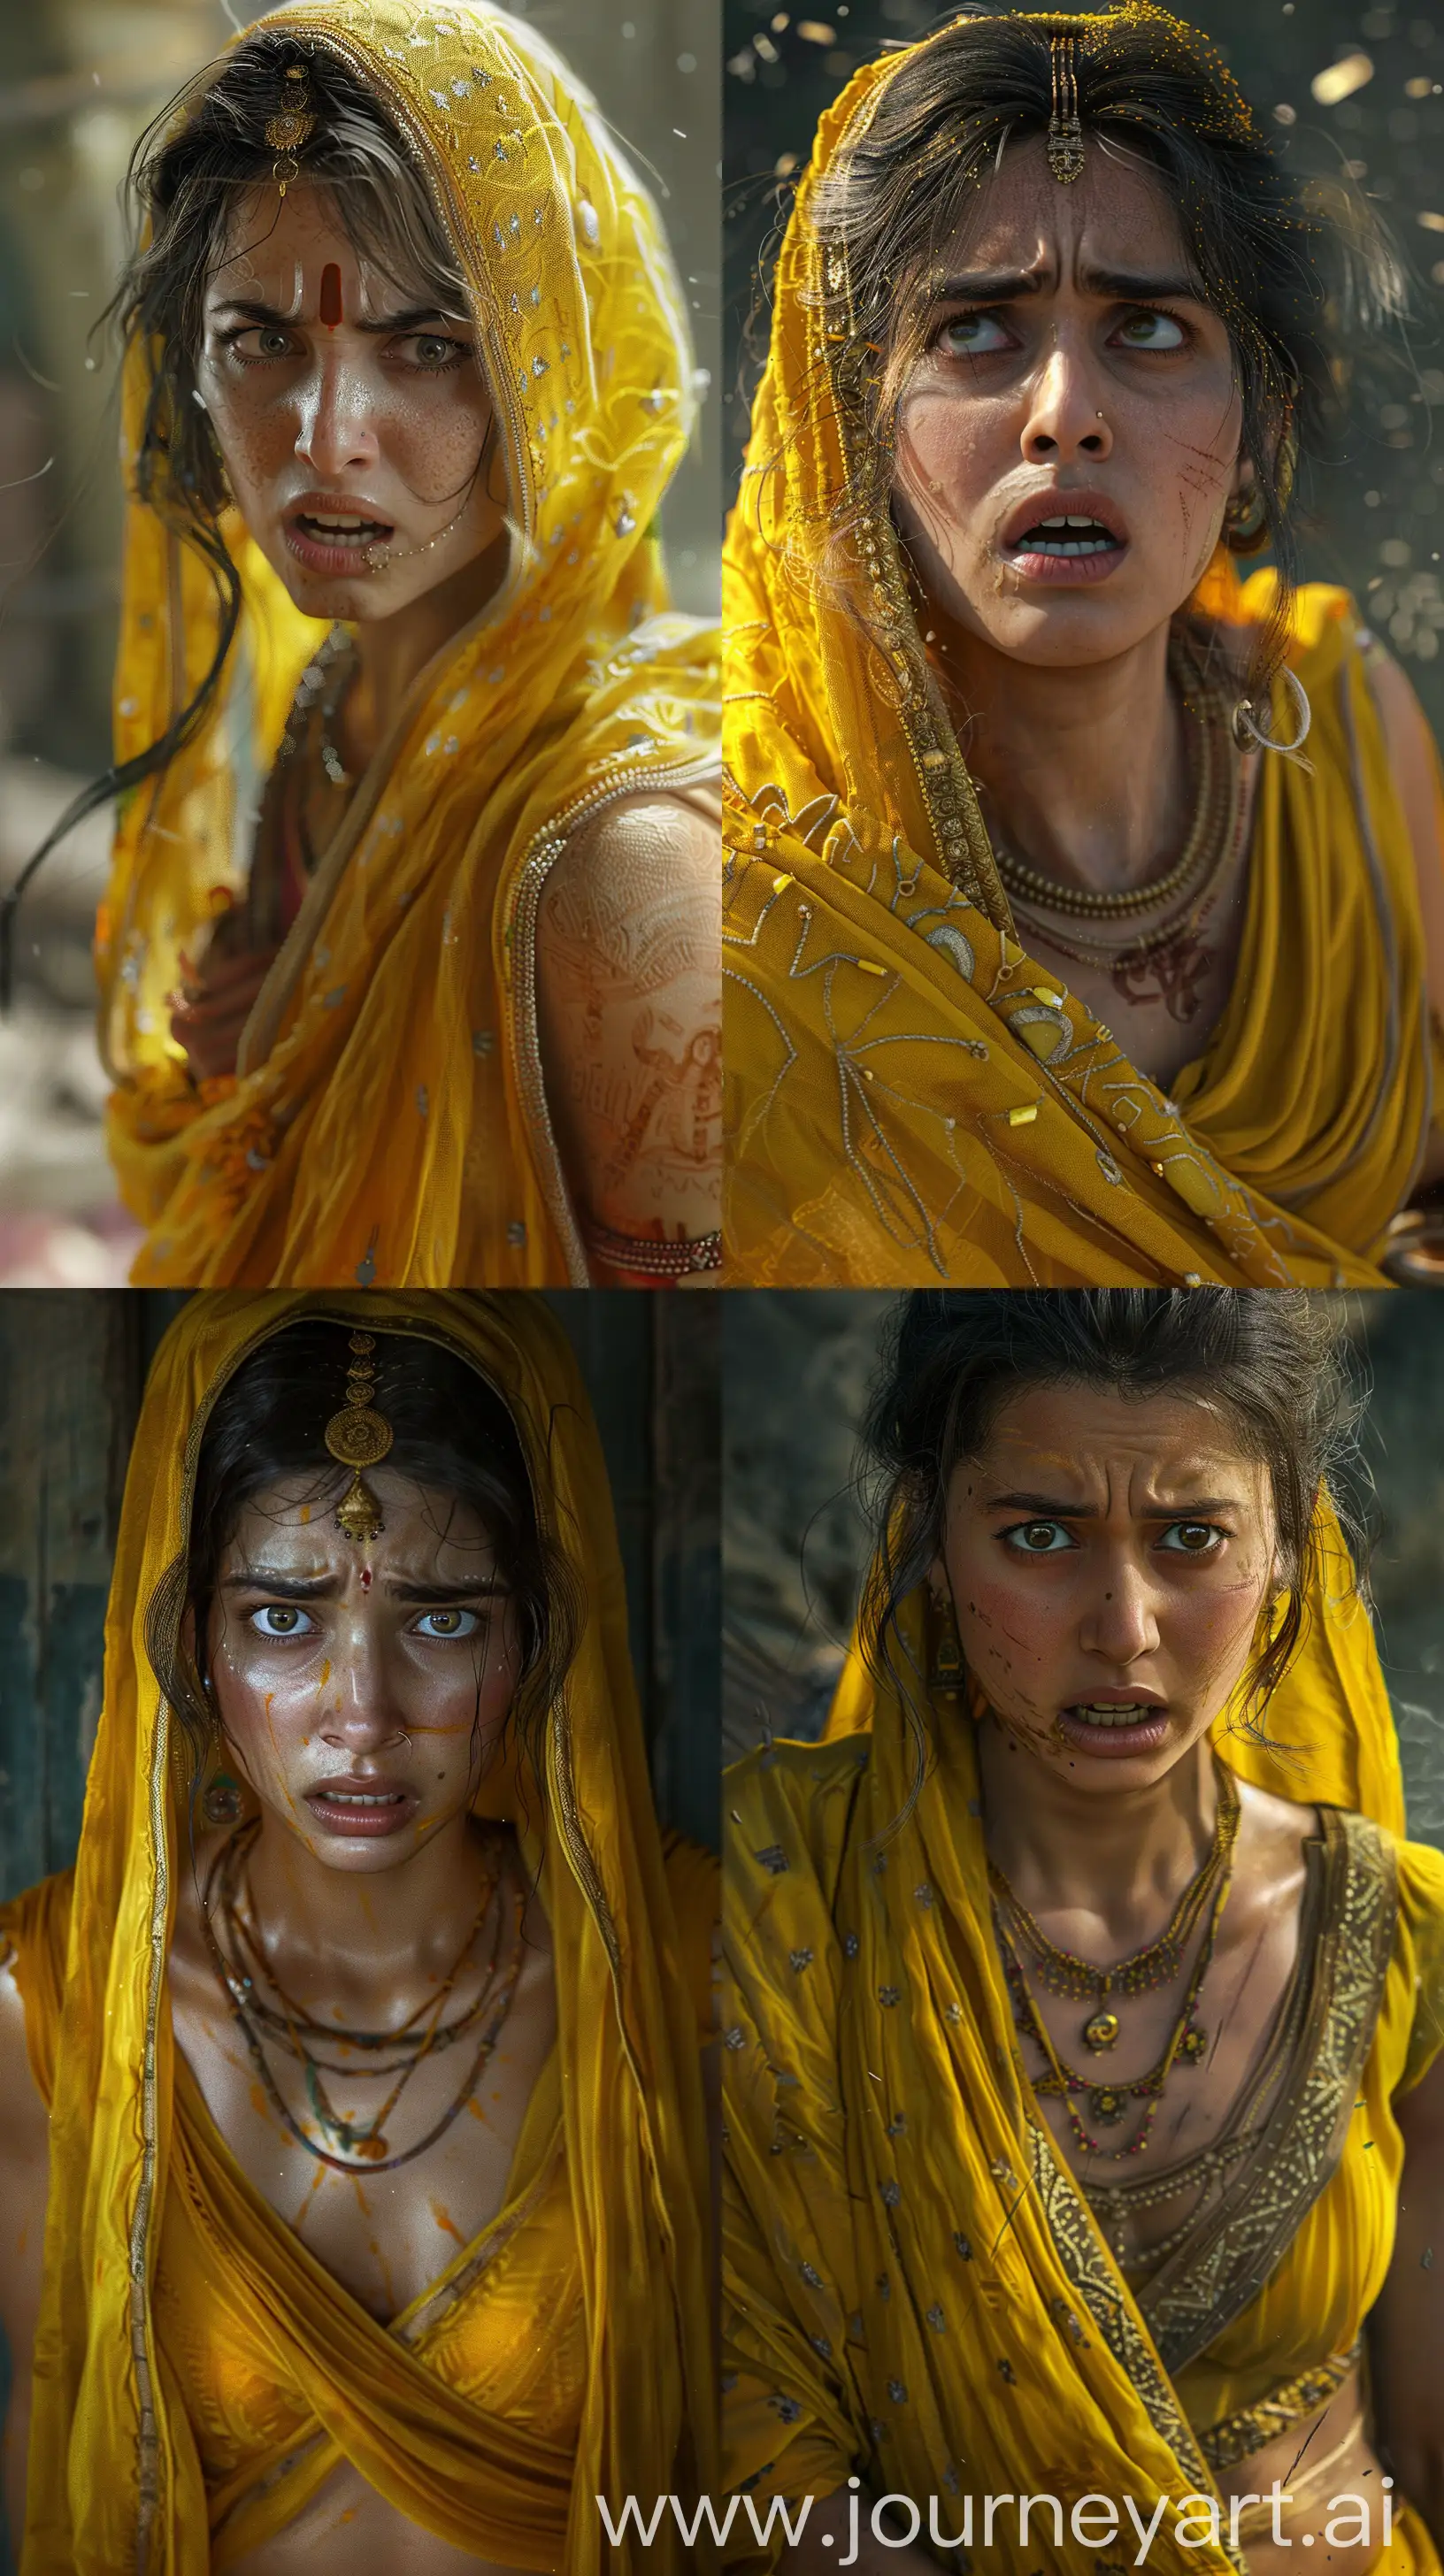 Hyper realistic image of an ancient Indian woman in her thirties, yellow attire, standing with a worried expression, intricate details, close-up image, 8k --s 200 --ar 9:16 --v 6